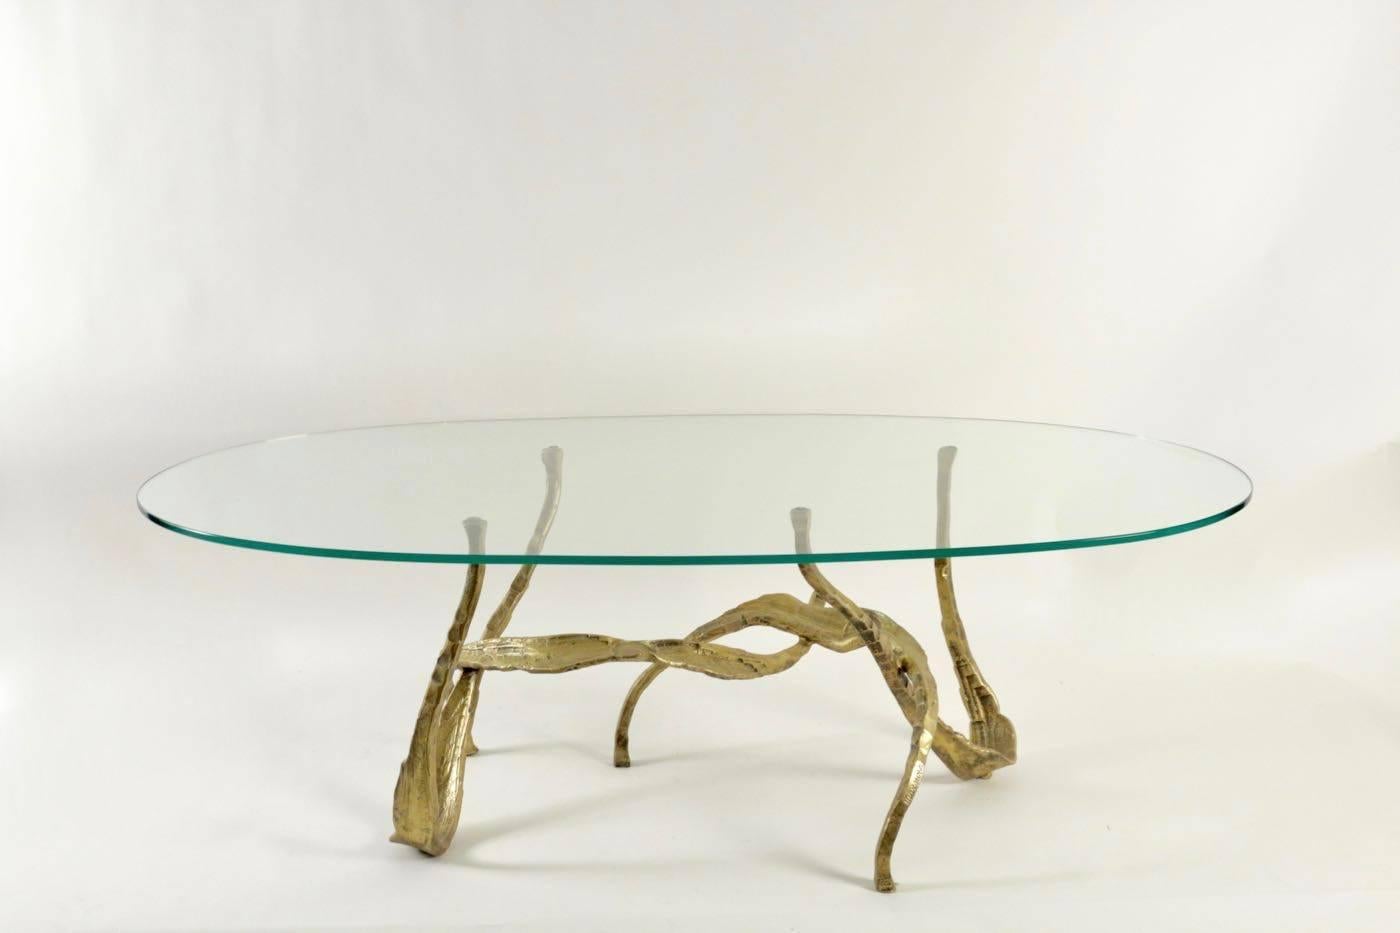 1970s Brutalist coffee table by Salvino Marsura

 Sculptural coffee table design by Salvino Marsura.
 Made of gilded wrought iron. Oval glass plate. 

Engraved Marsura signature located on one foot.